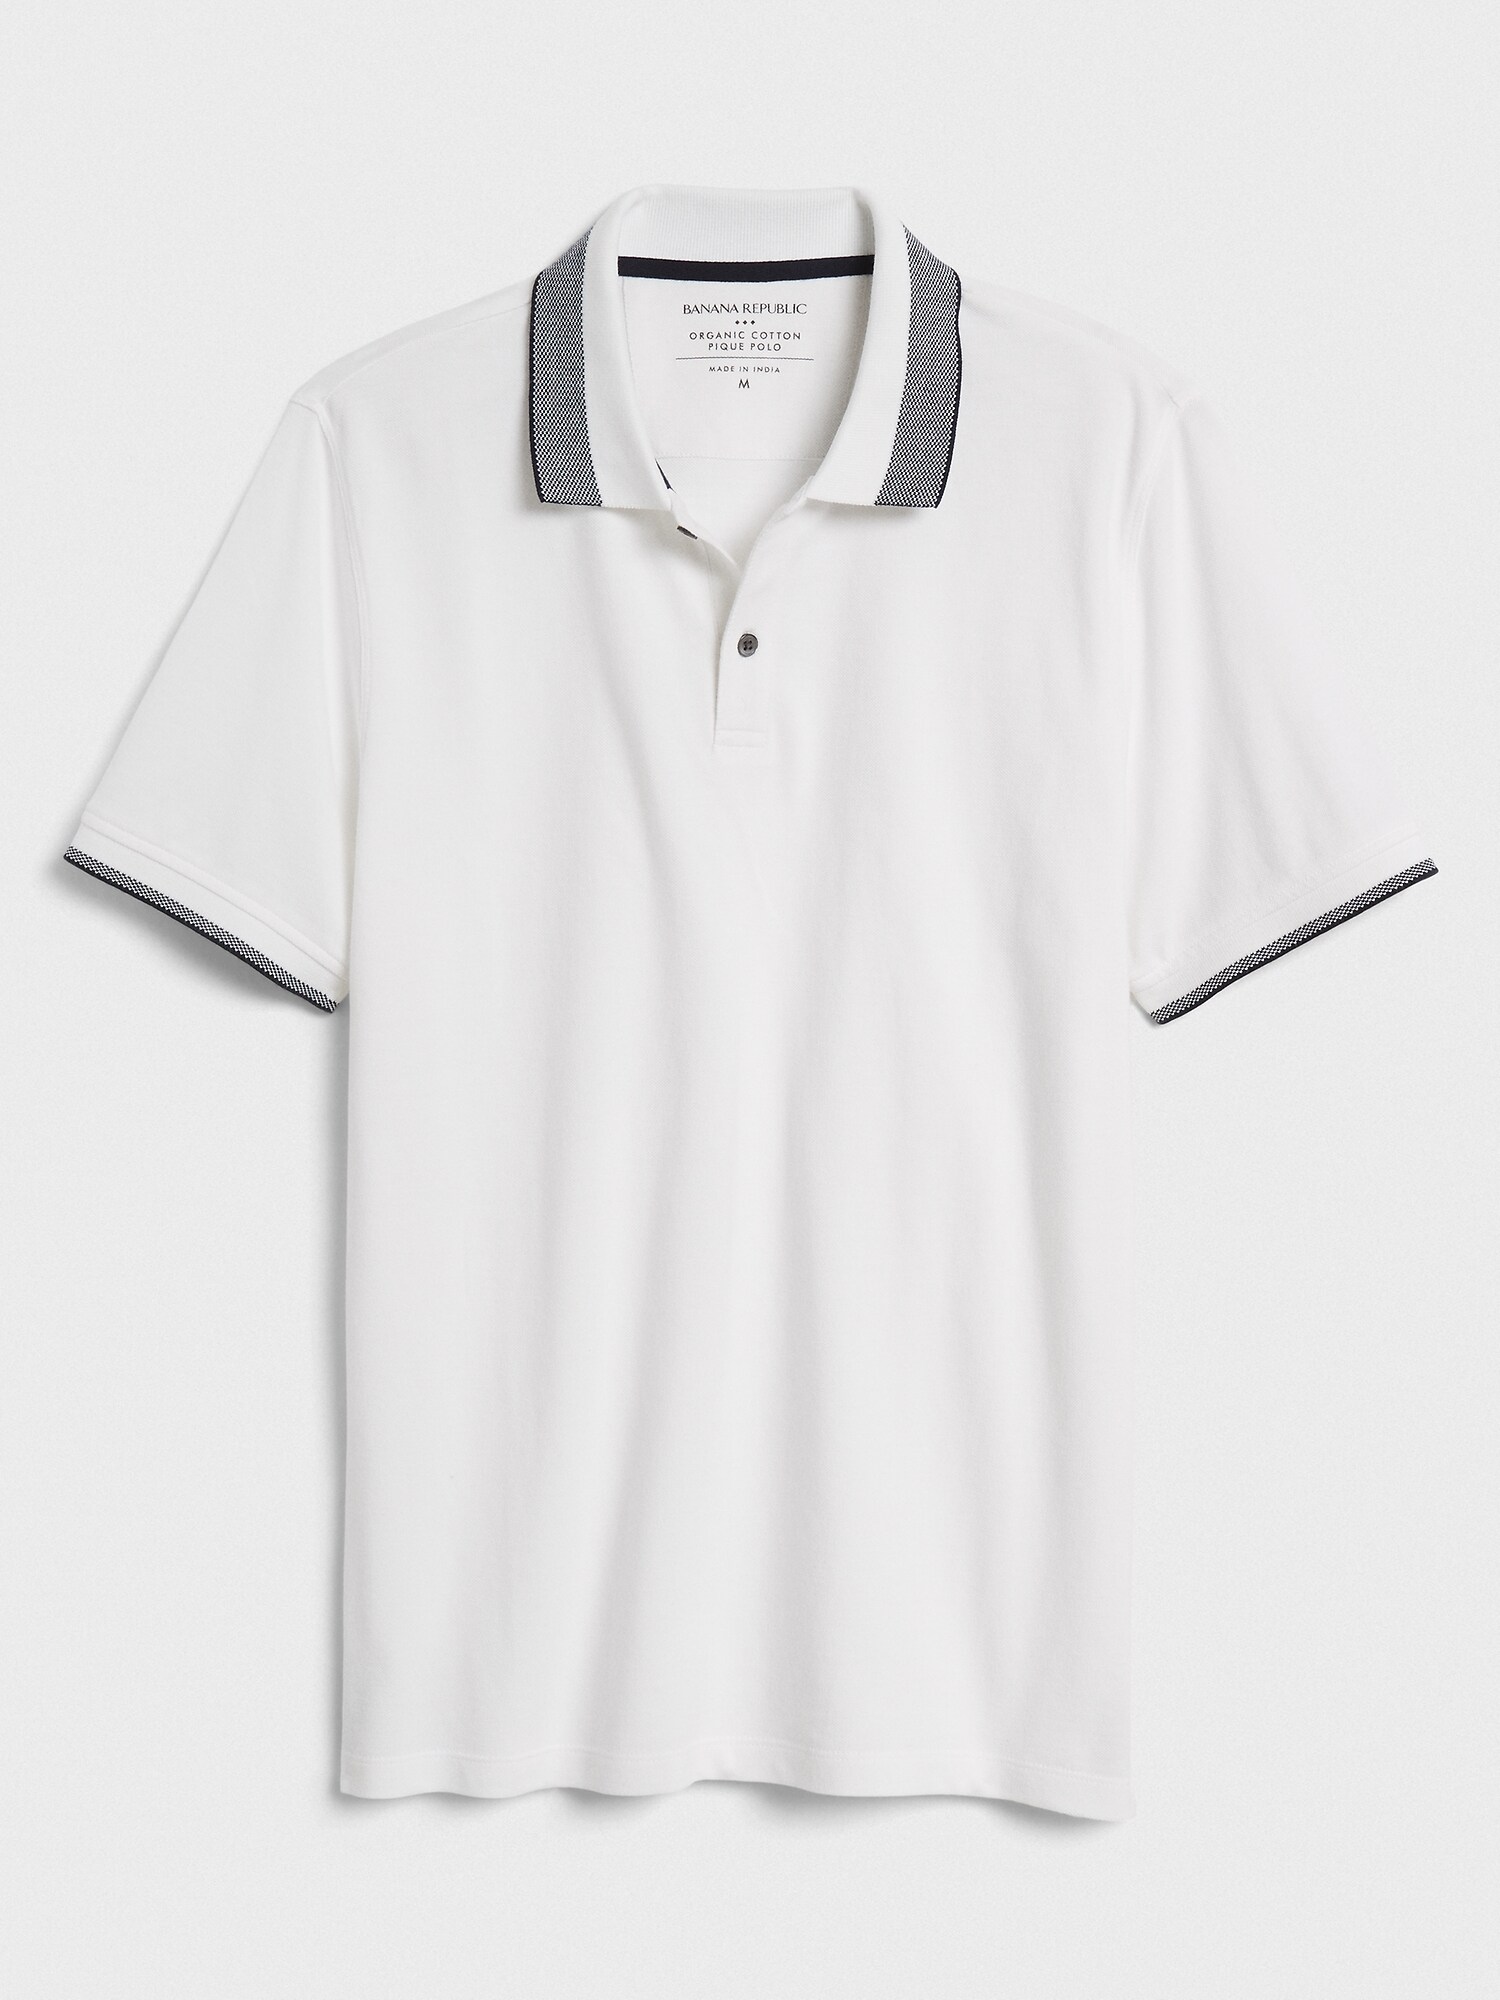 Made with Organically Grown Cotton Tipped Pique Polo